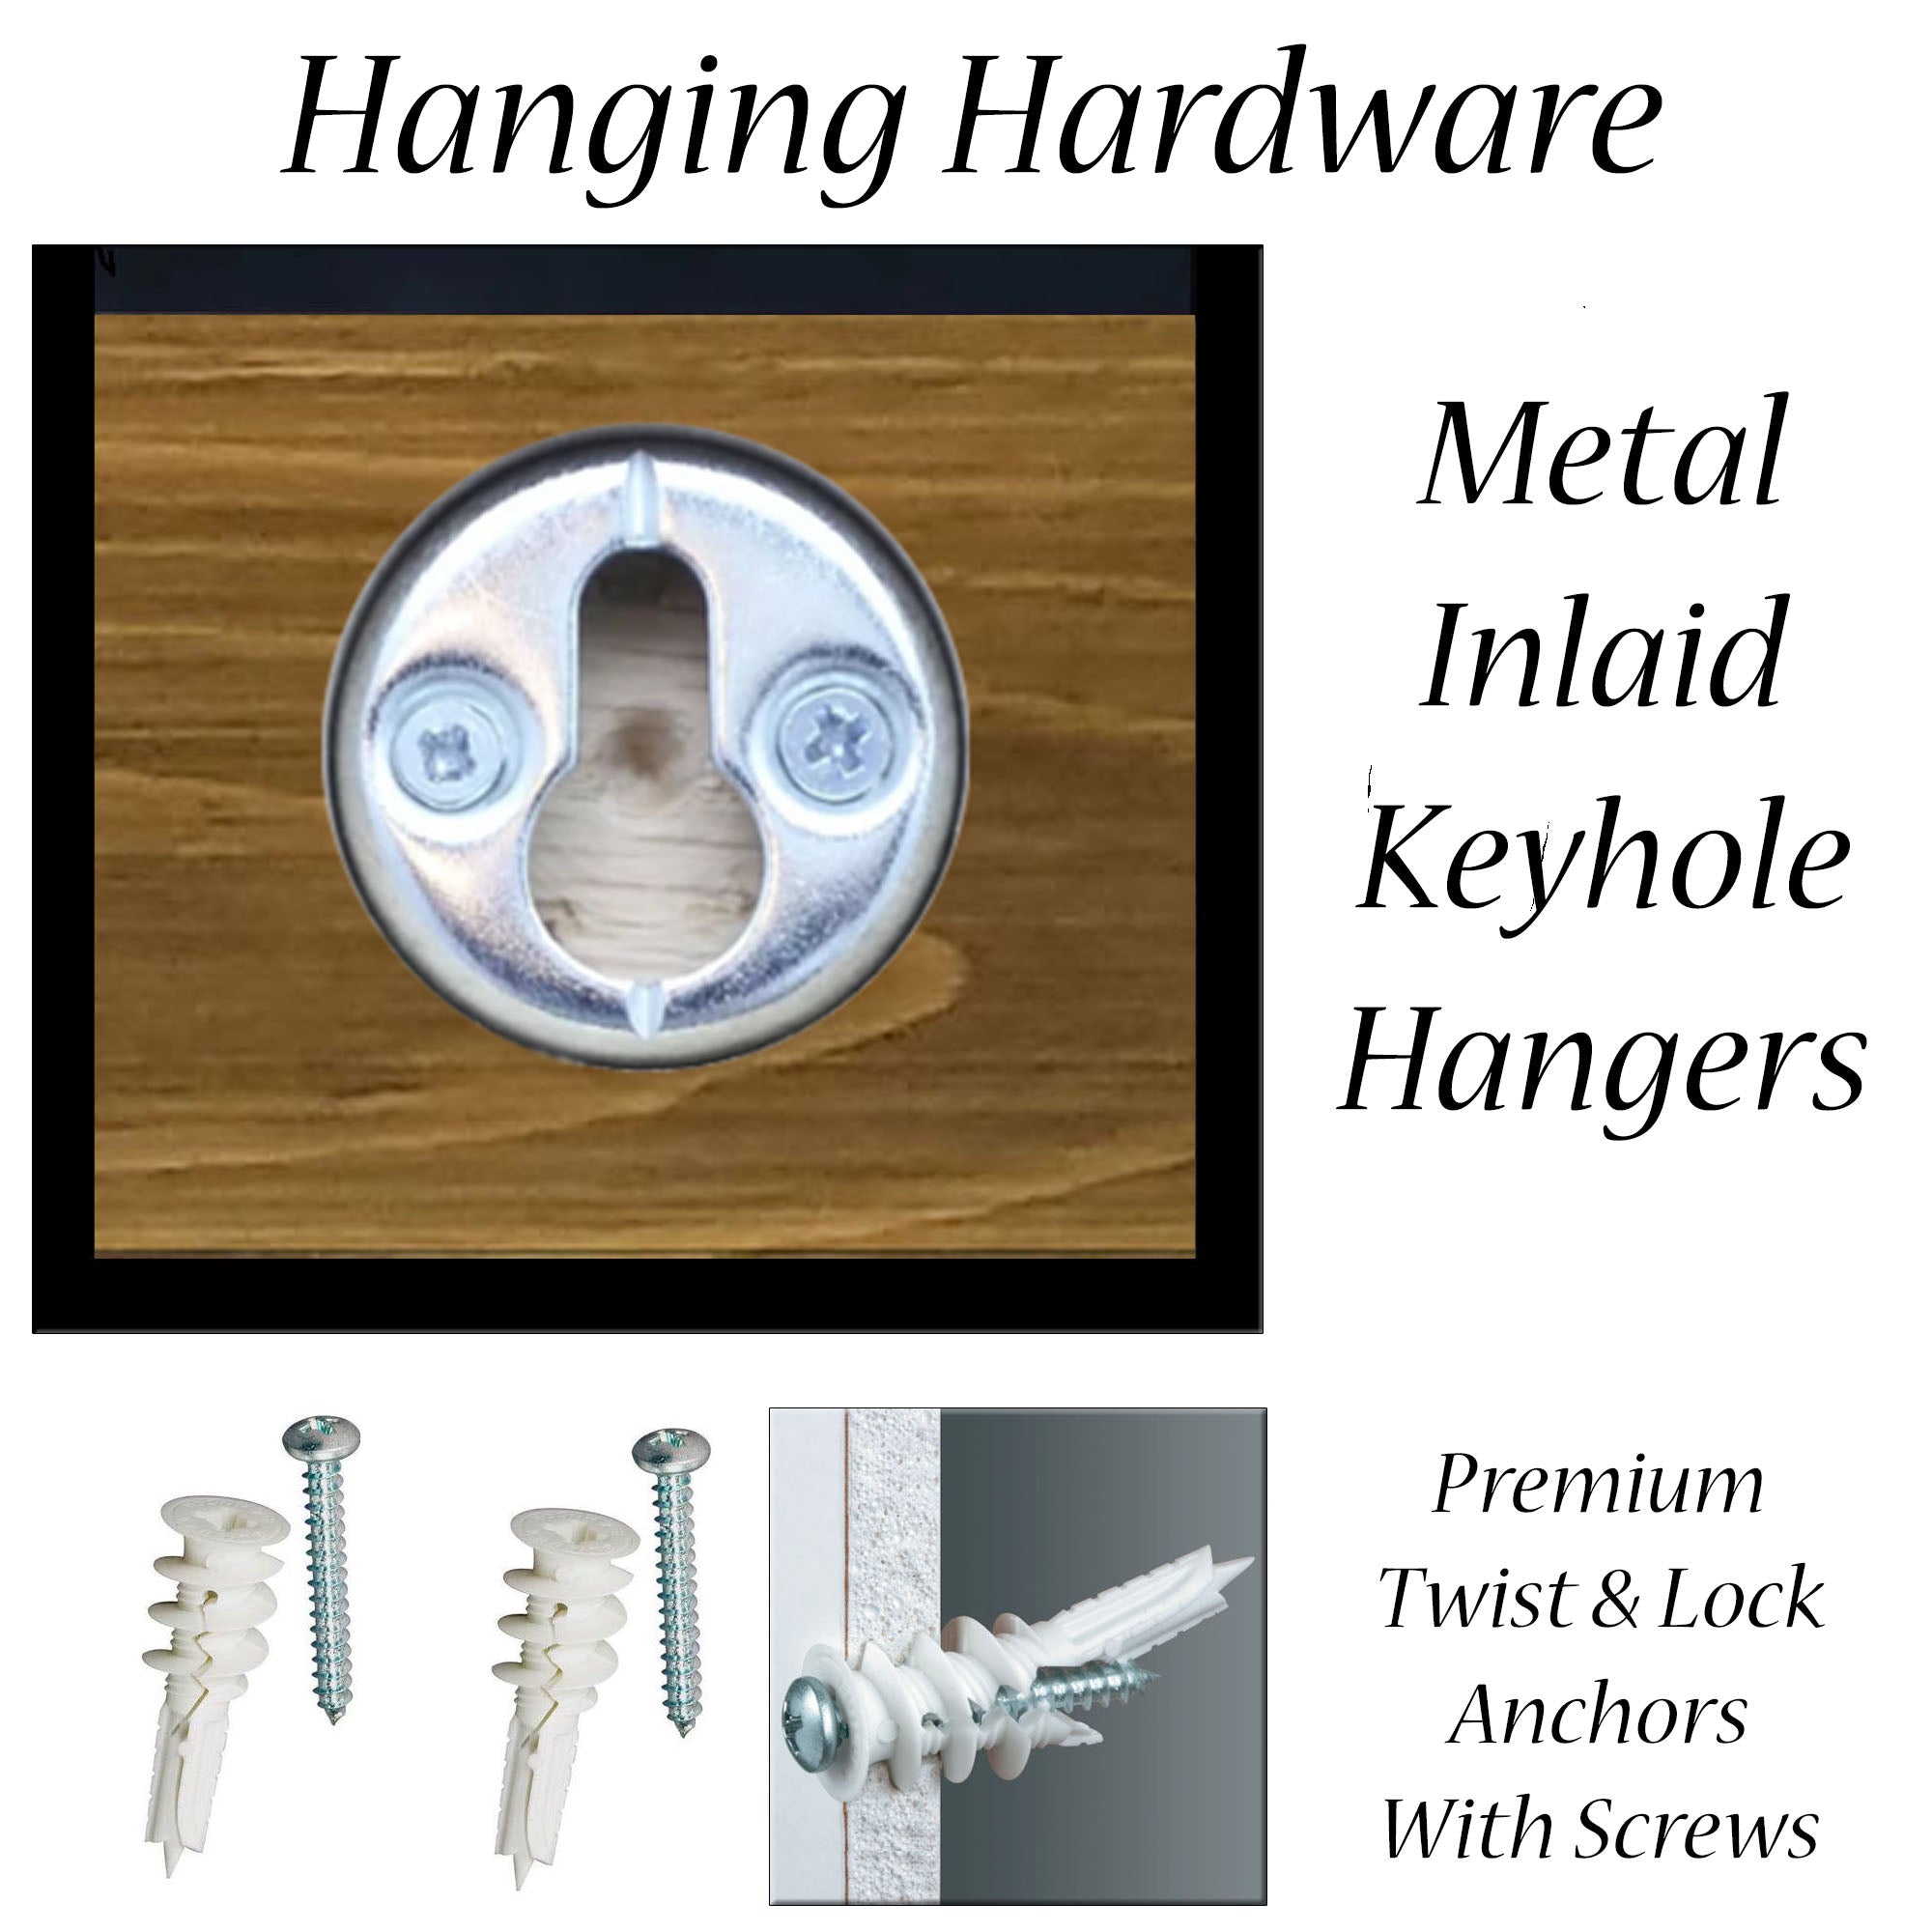 Hanging Hardware, Sawtooth Hangers & Drywall Anchors